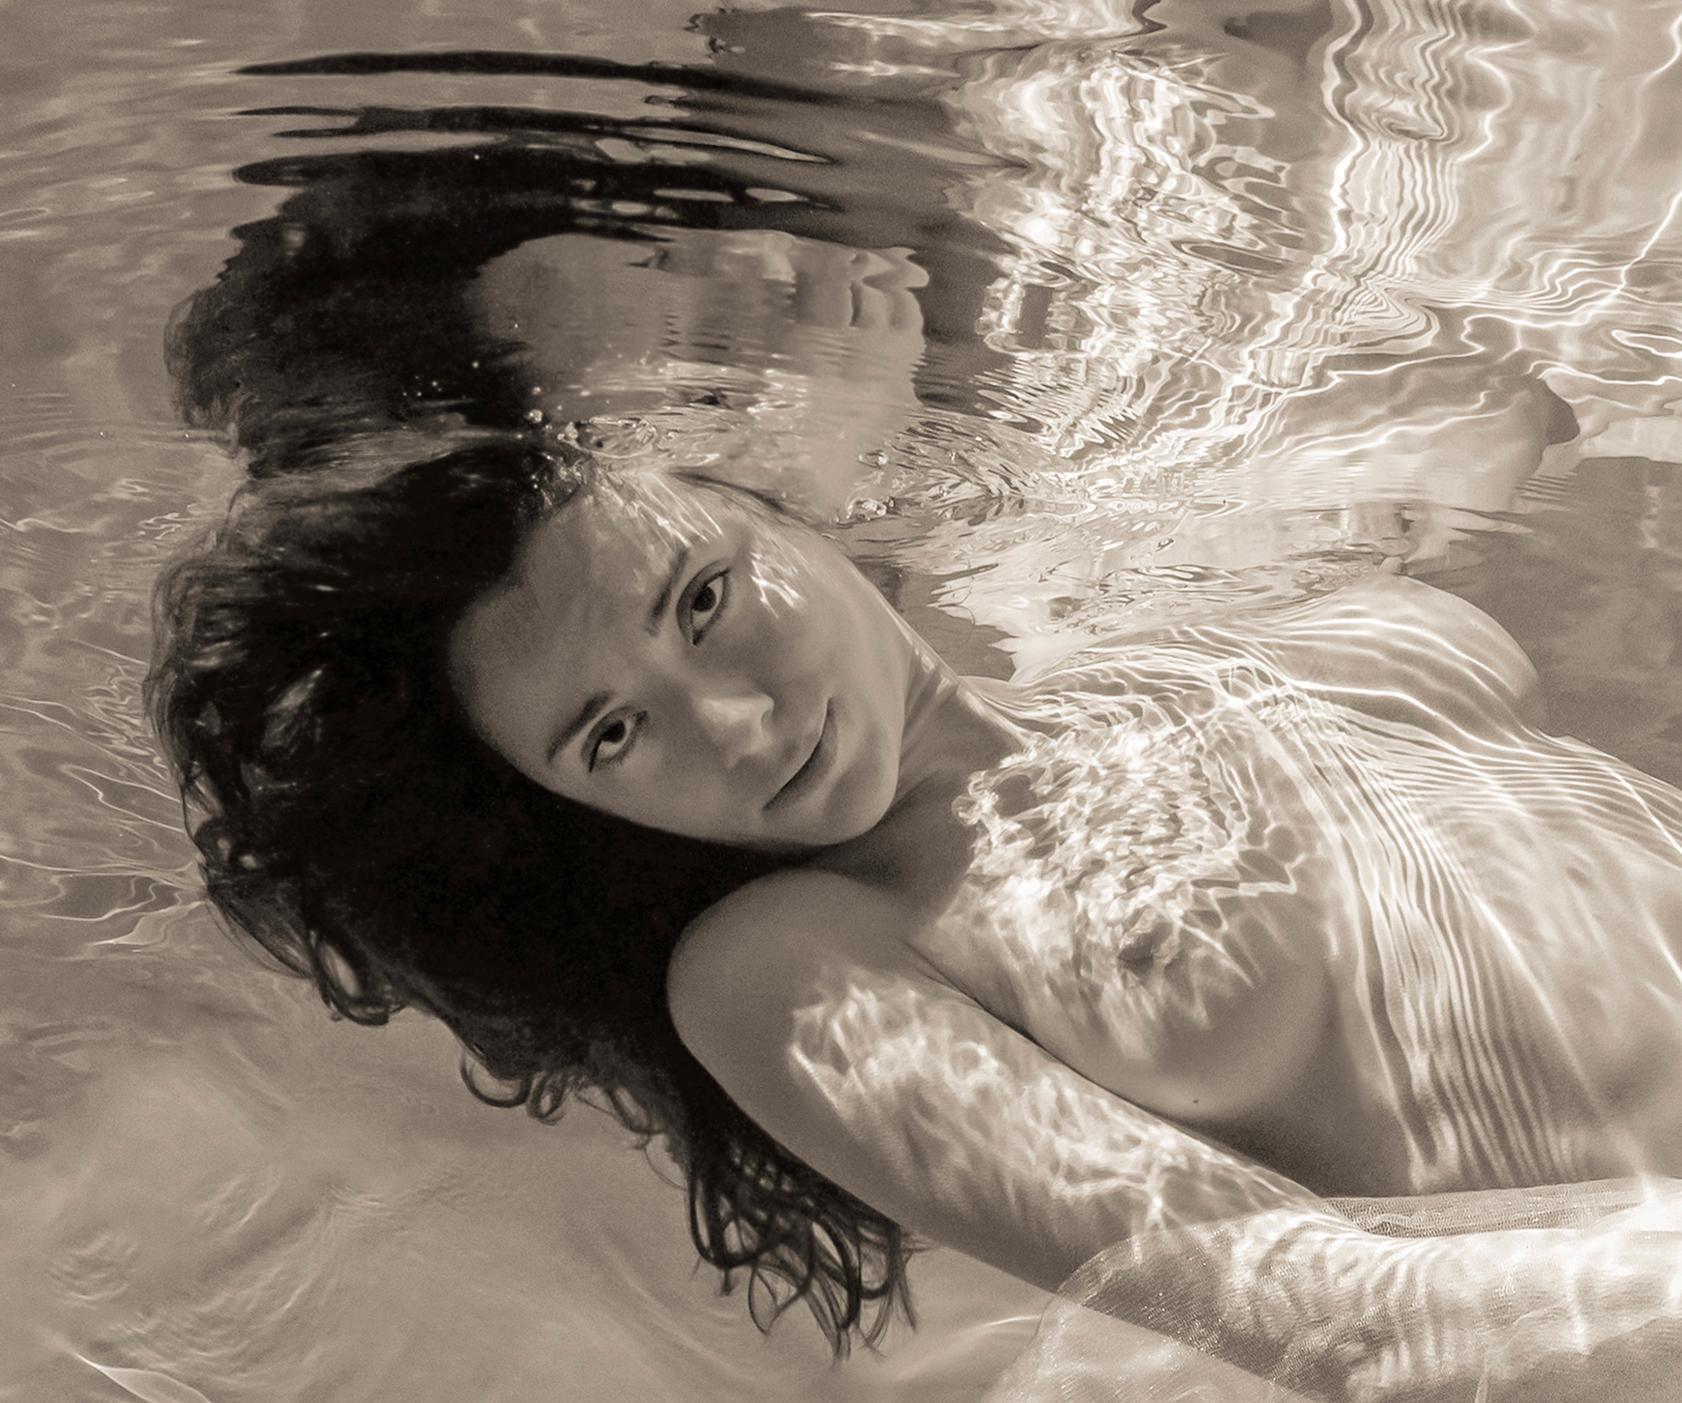 Old Album - underwater nude photograph - archival pigment print - Photograph by Alex Sher